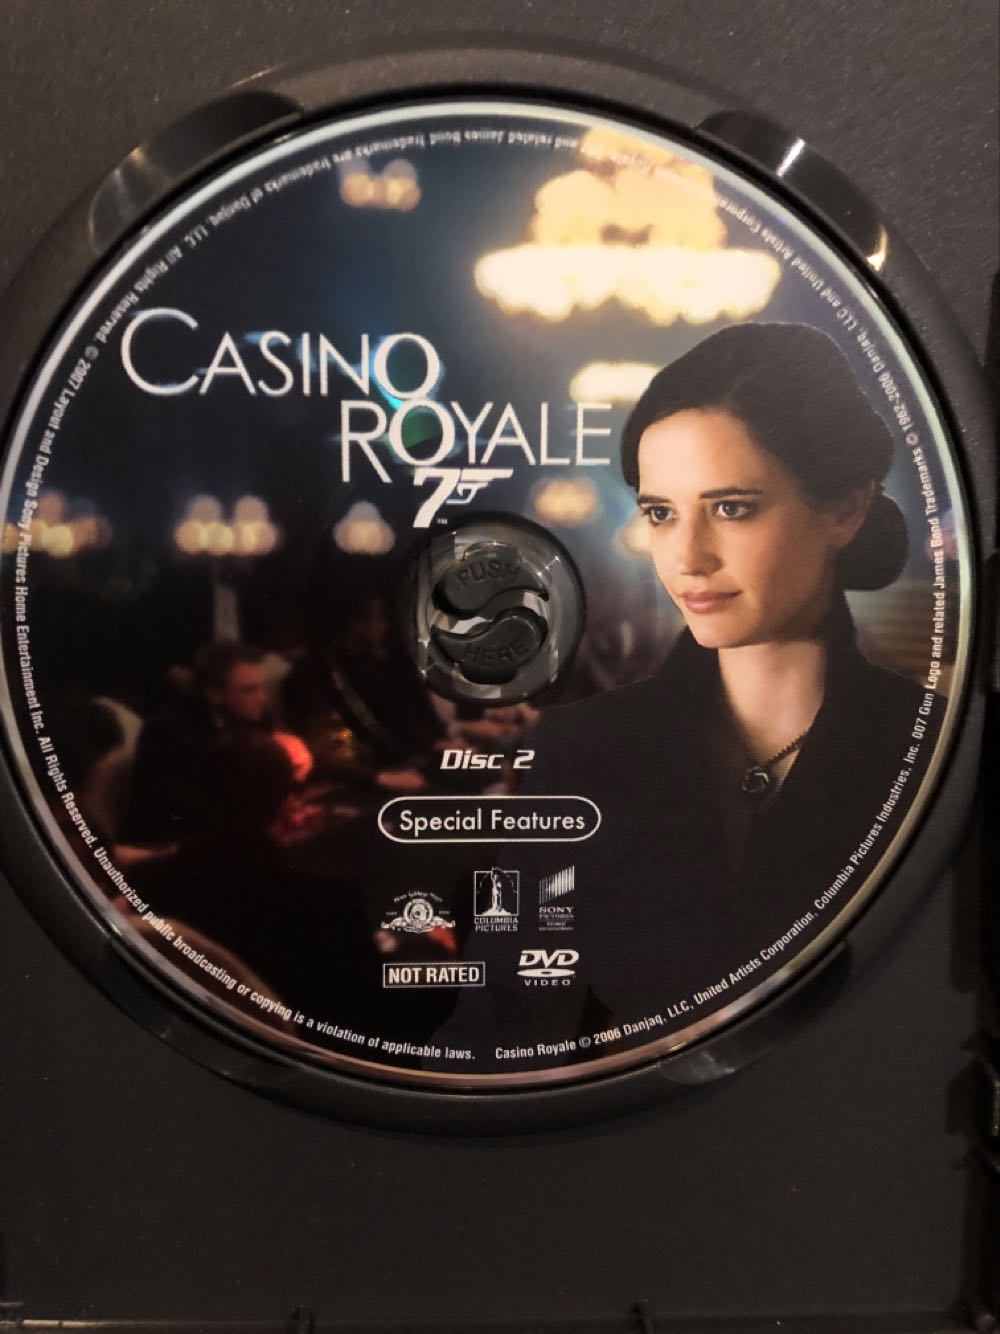 Casino Royale 007 DVD movie collectible [Barcode 043396151901] - Main Image 4